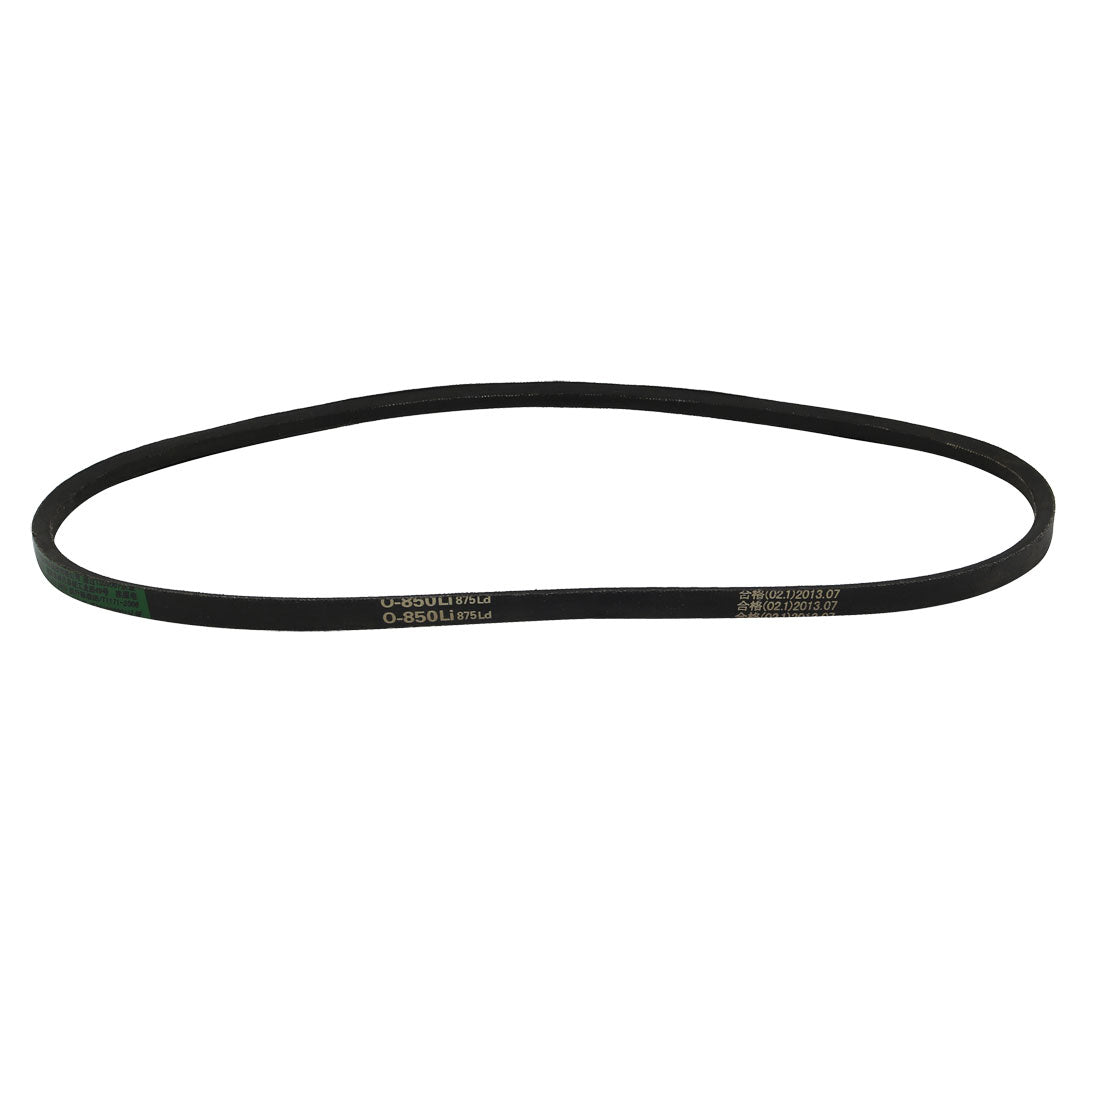 uxcell Uxcell O-850 Rubber Transmission Drive Belt V-Belt 10mm Wide 6mm Thick for Washing Machine